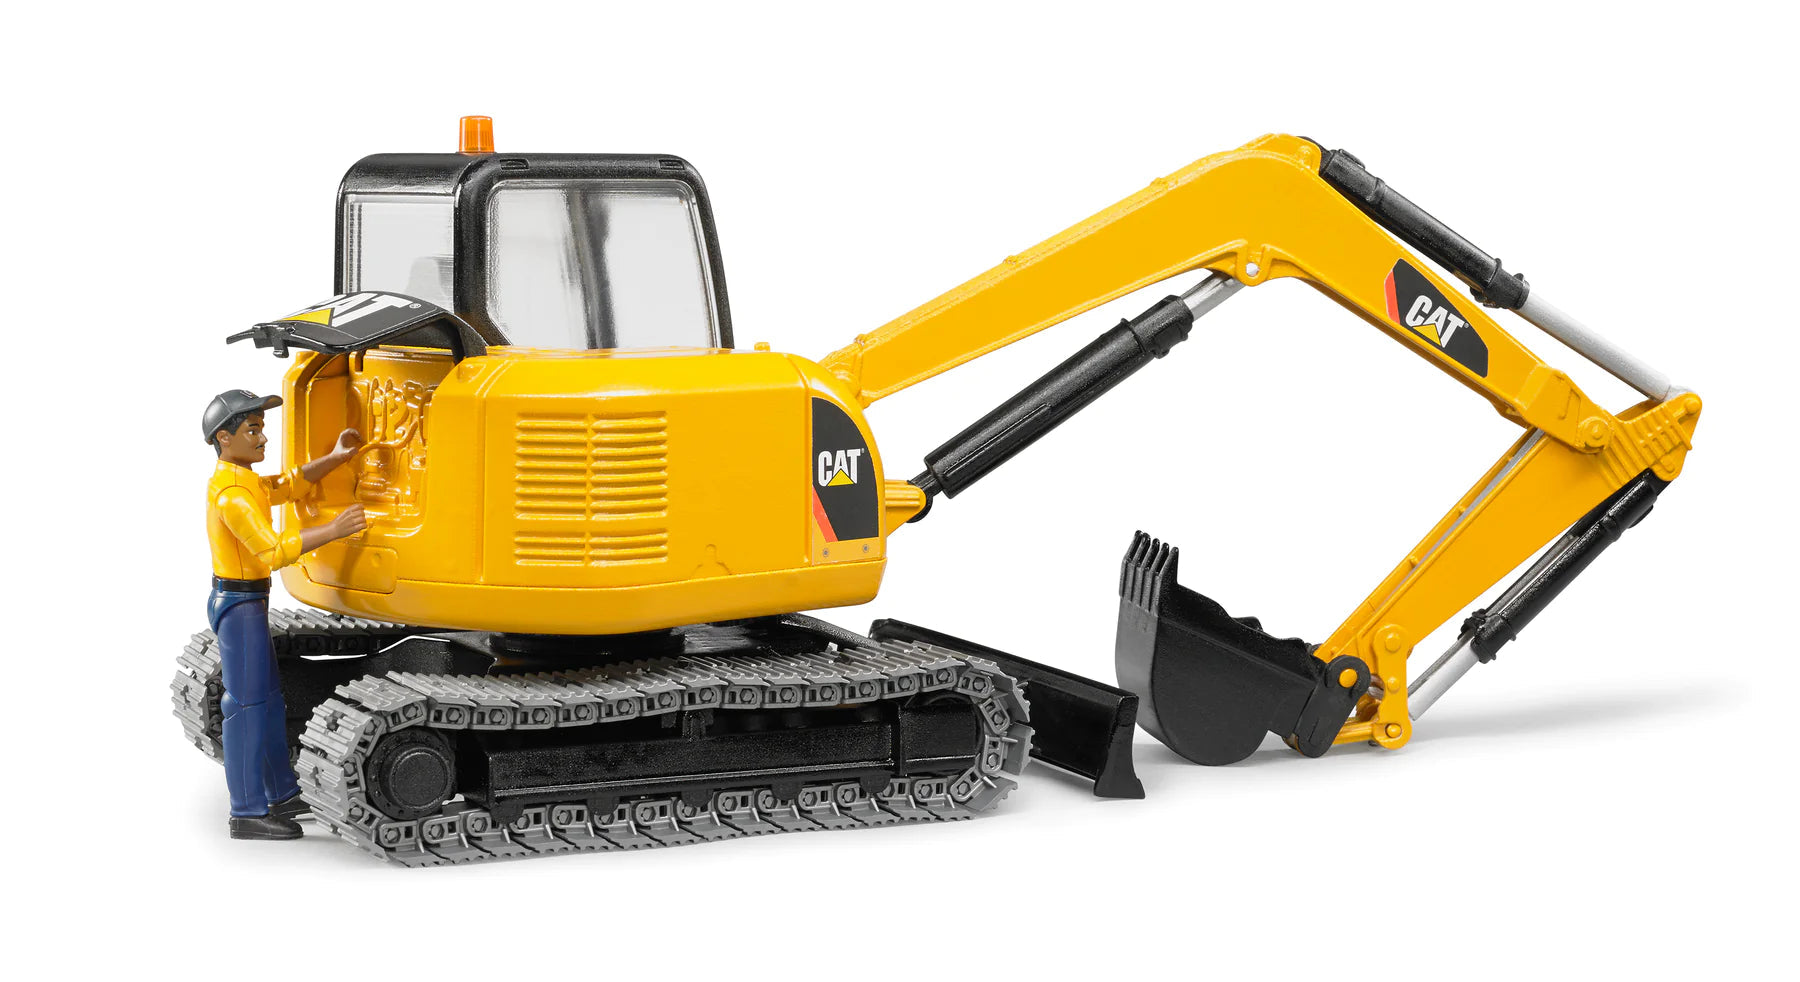 Bruder-CATERPILLAR Mini Excavator with worker-02467-Legacy Toys